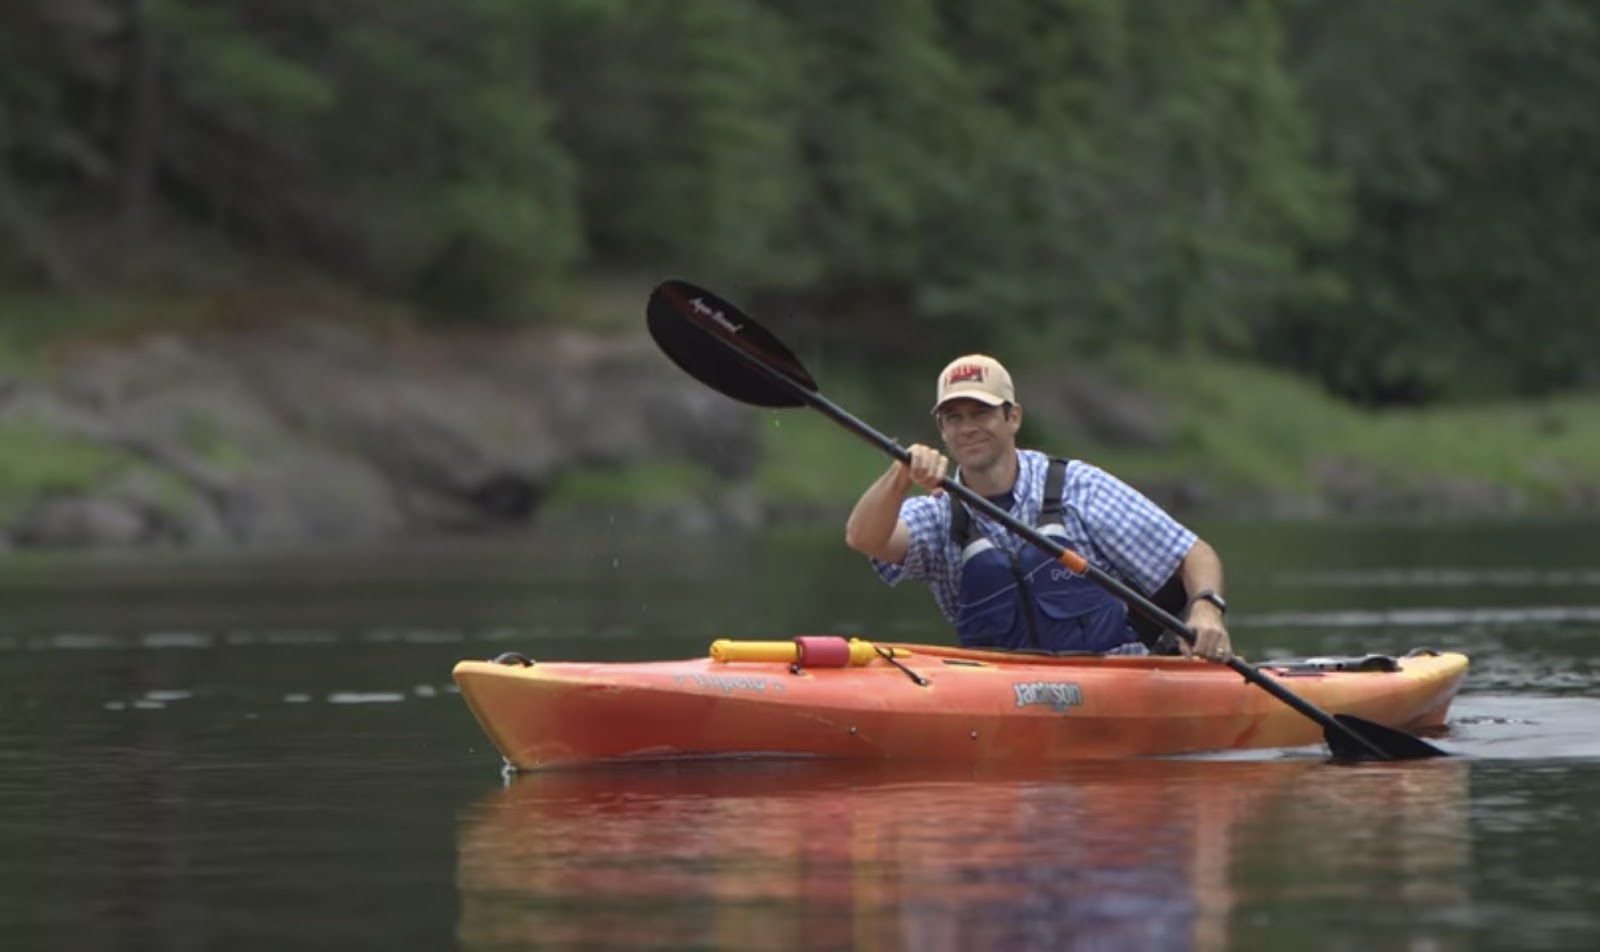 Exciting kayak with trolling motor For Thrill And Adventure